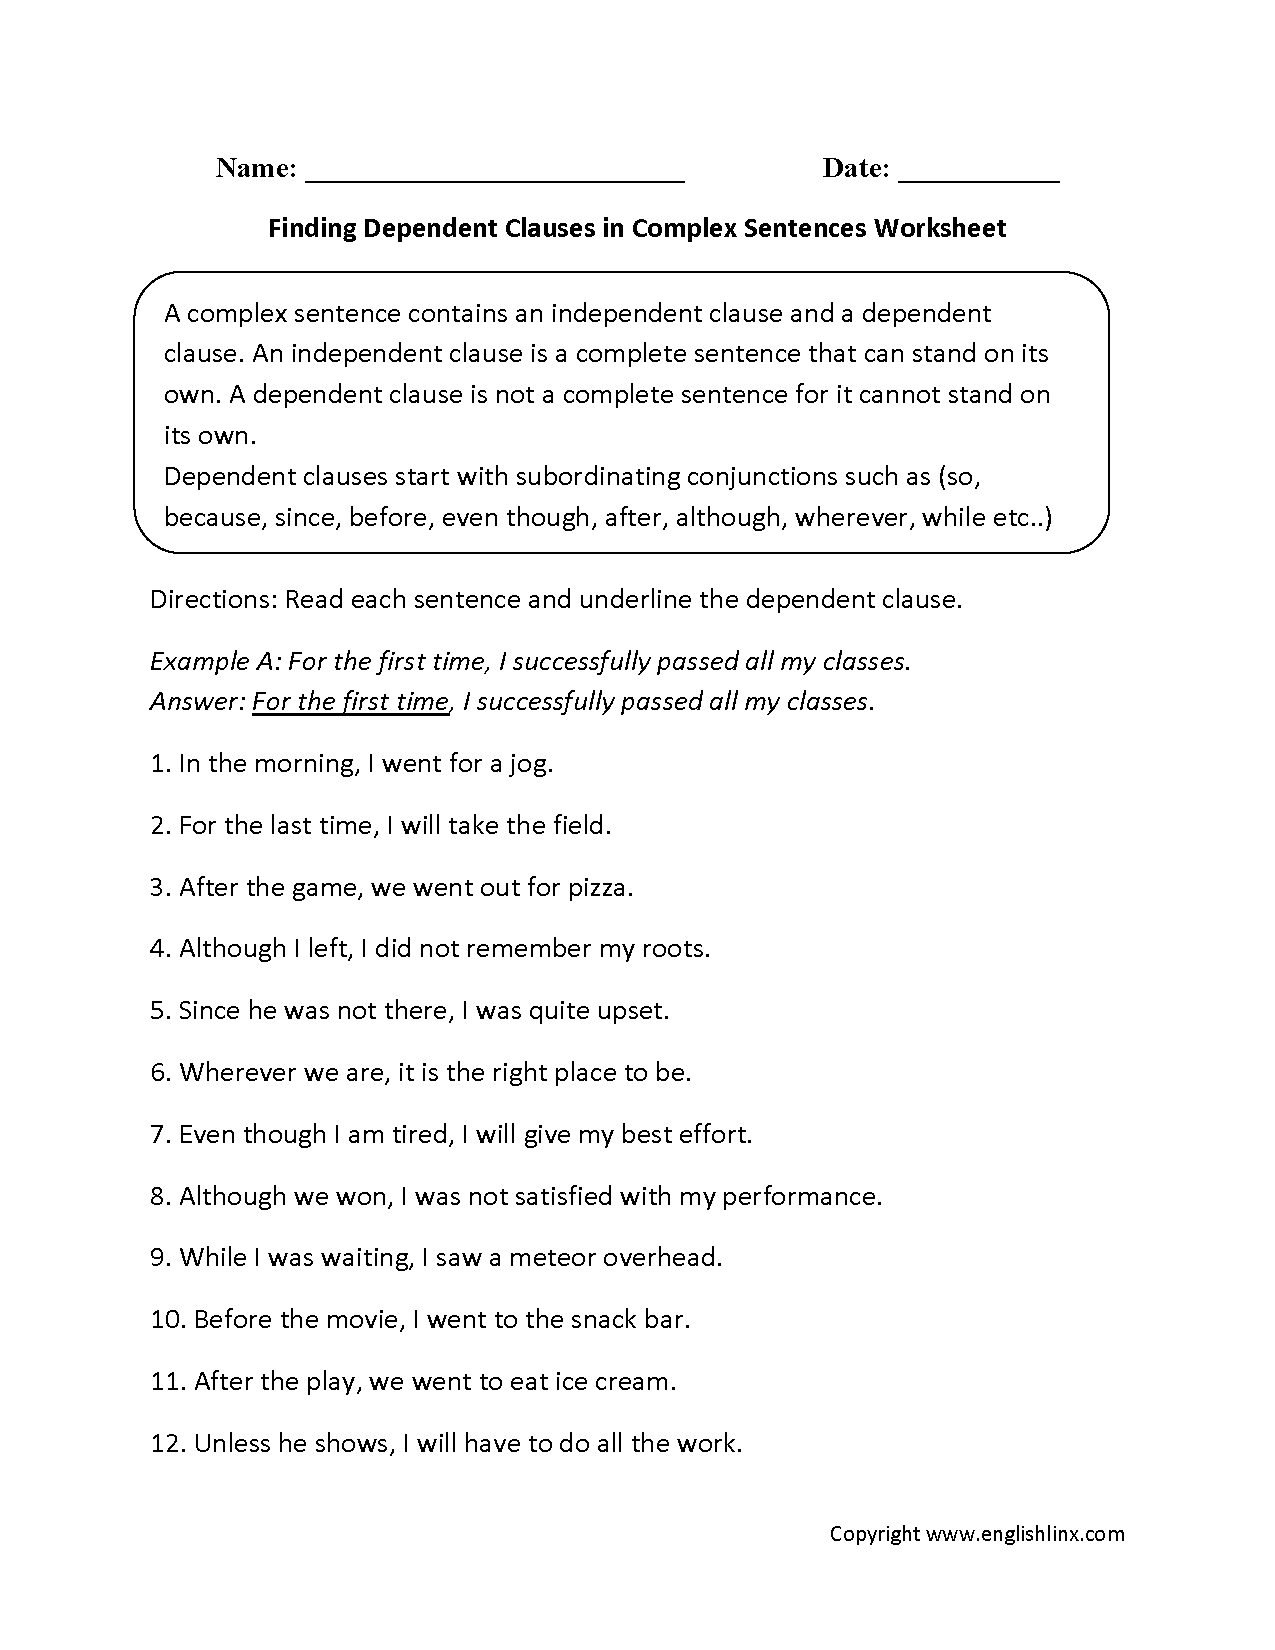 free-printable-collective-nouns-worksheet-in-2021-collective-nouns